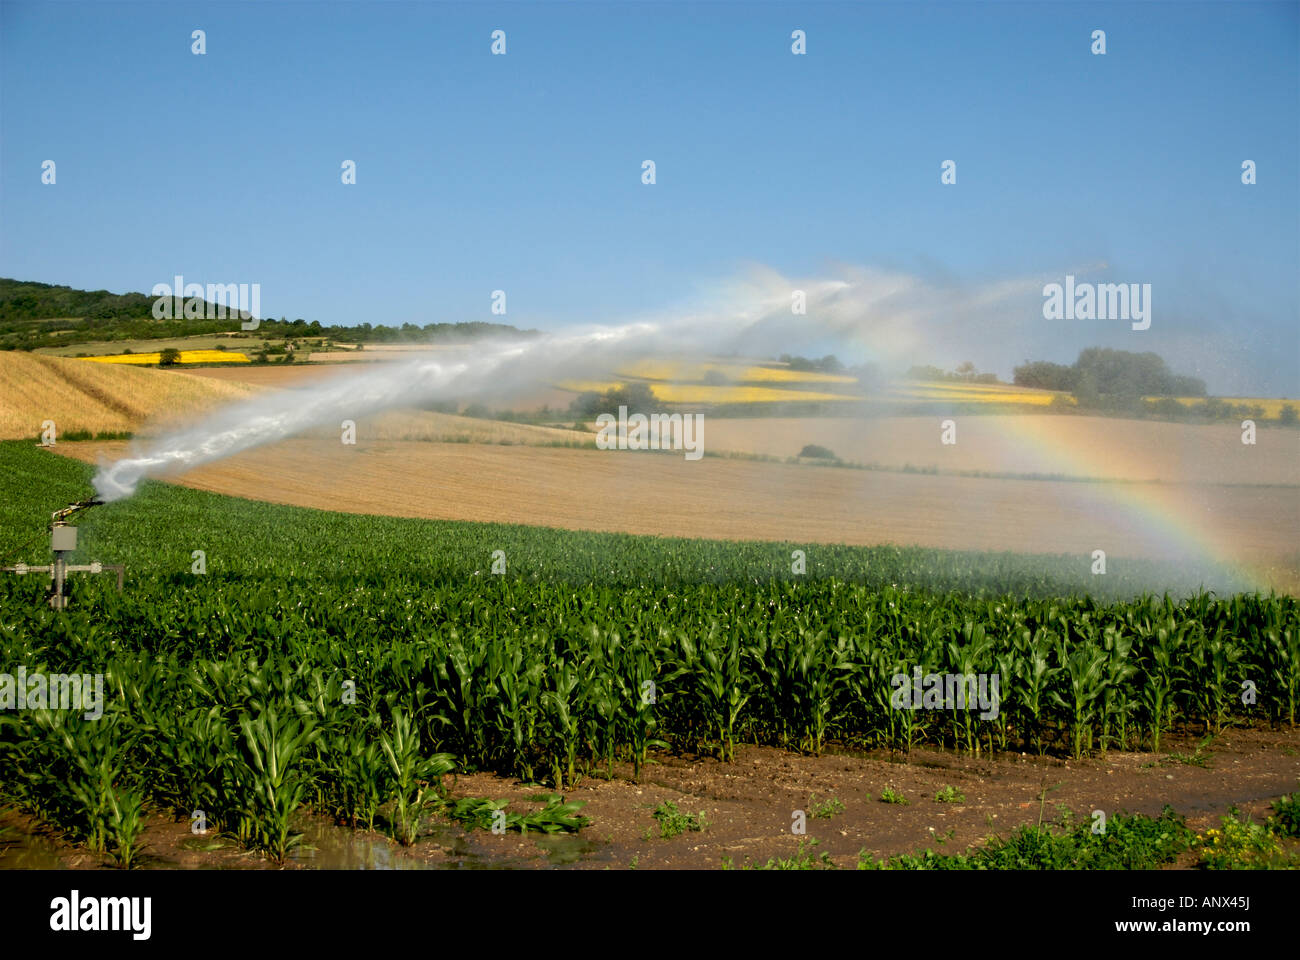 Sprinkler installation in a field of maize, Limagne, Auvergne, France, Europe Stock Photo